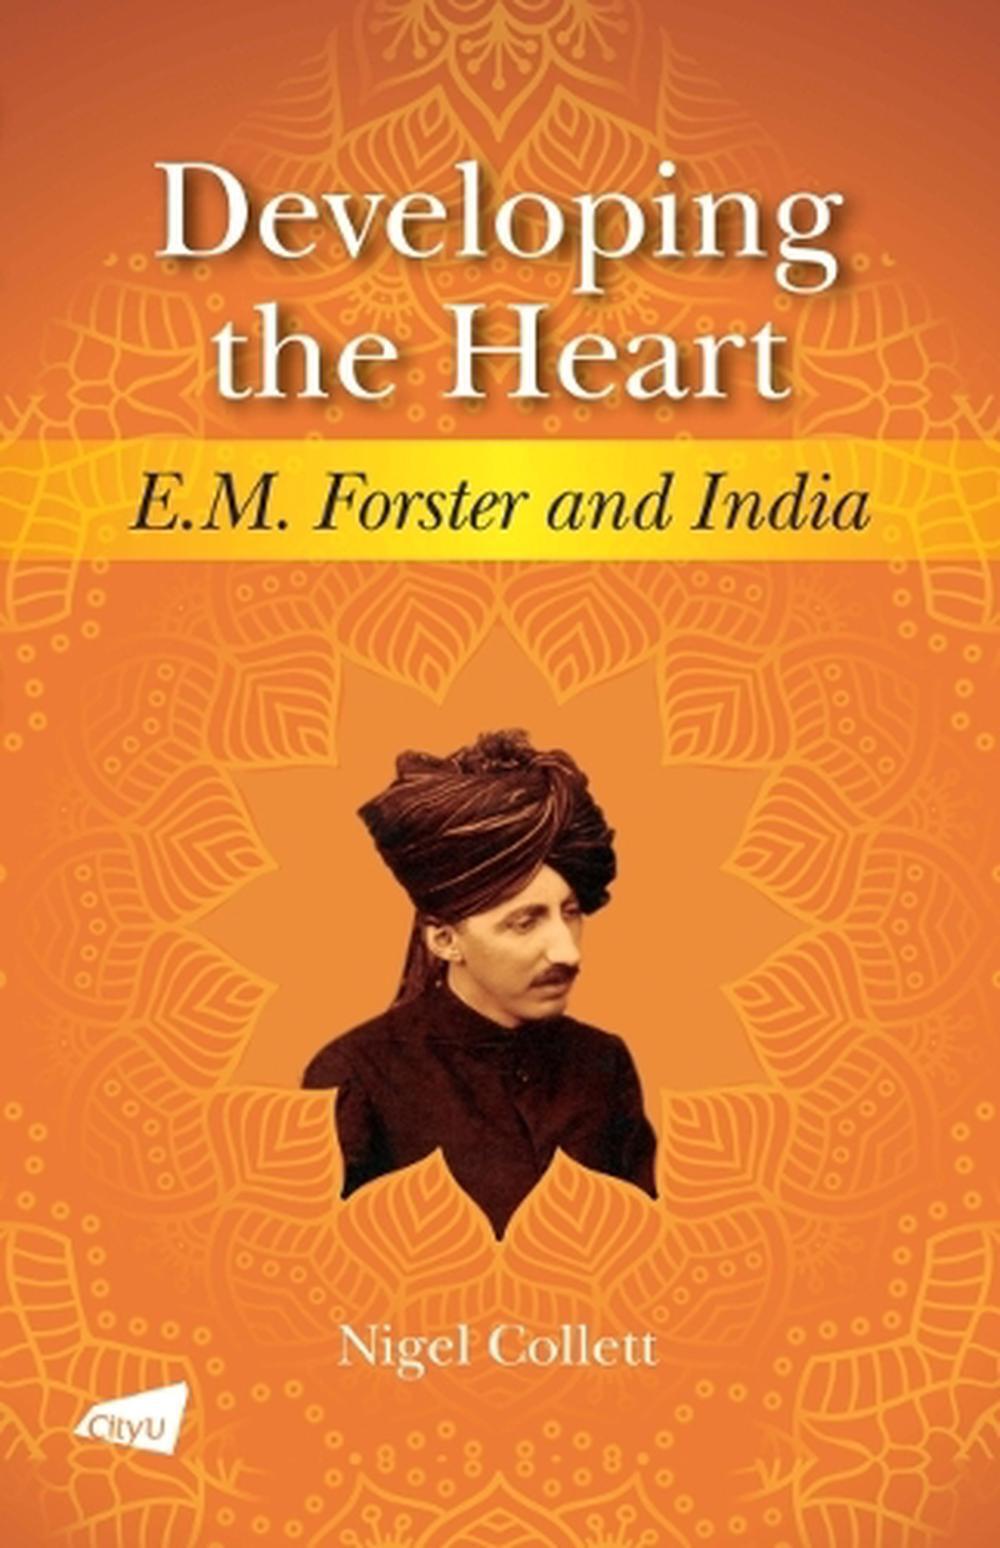 Developing the Heart: E.M. Forster and India by Nigel Collett (English) Paperbac